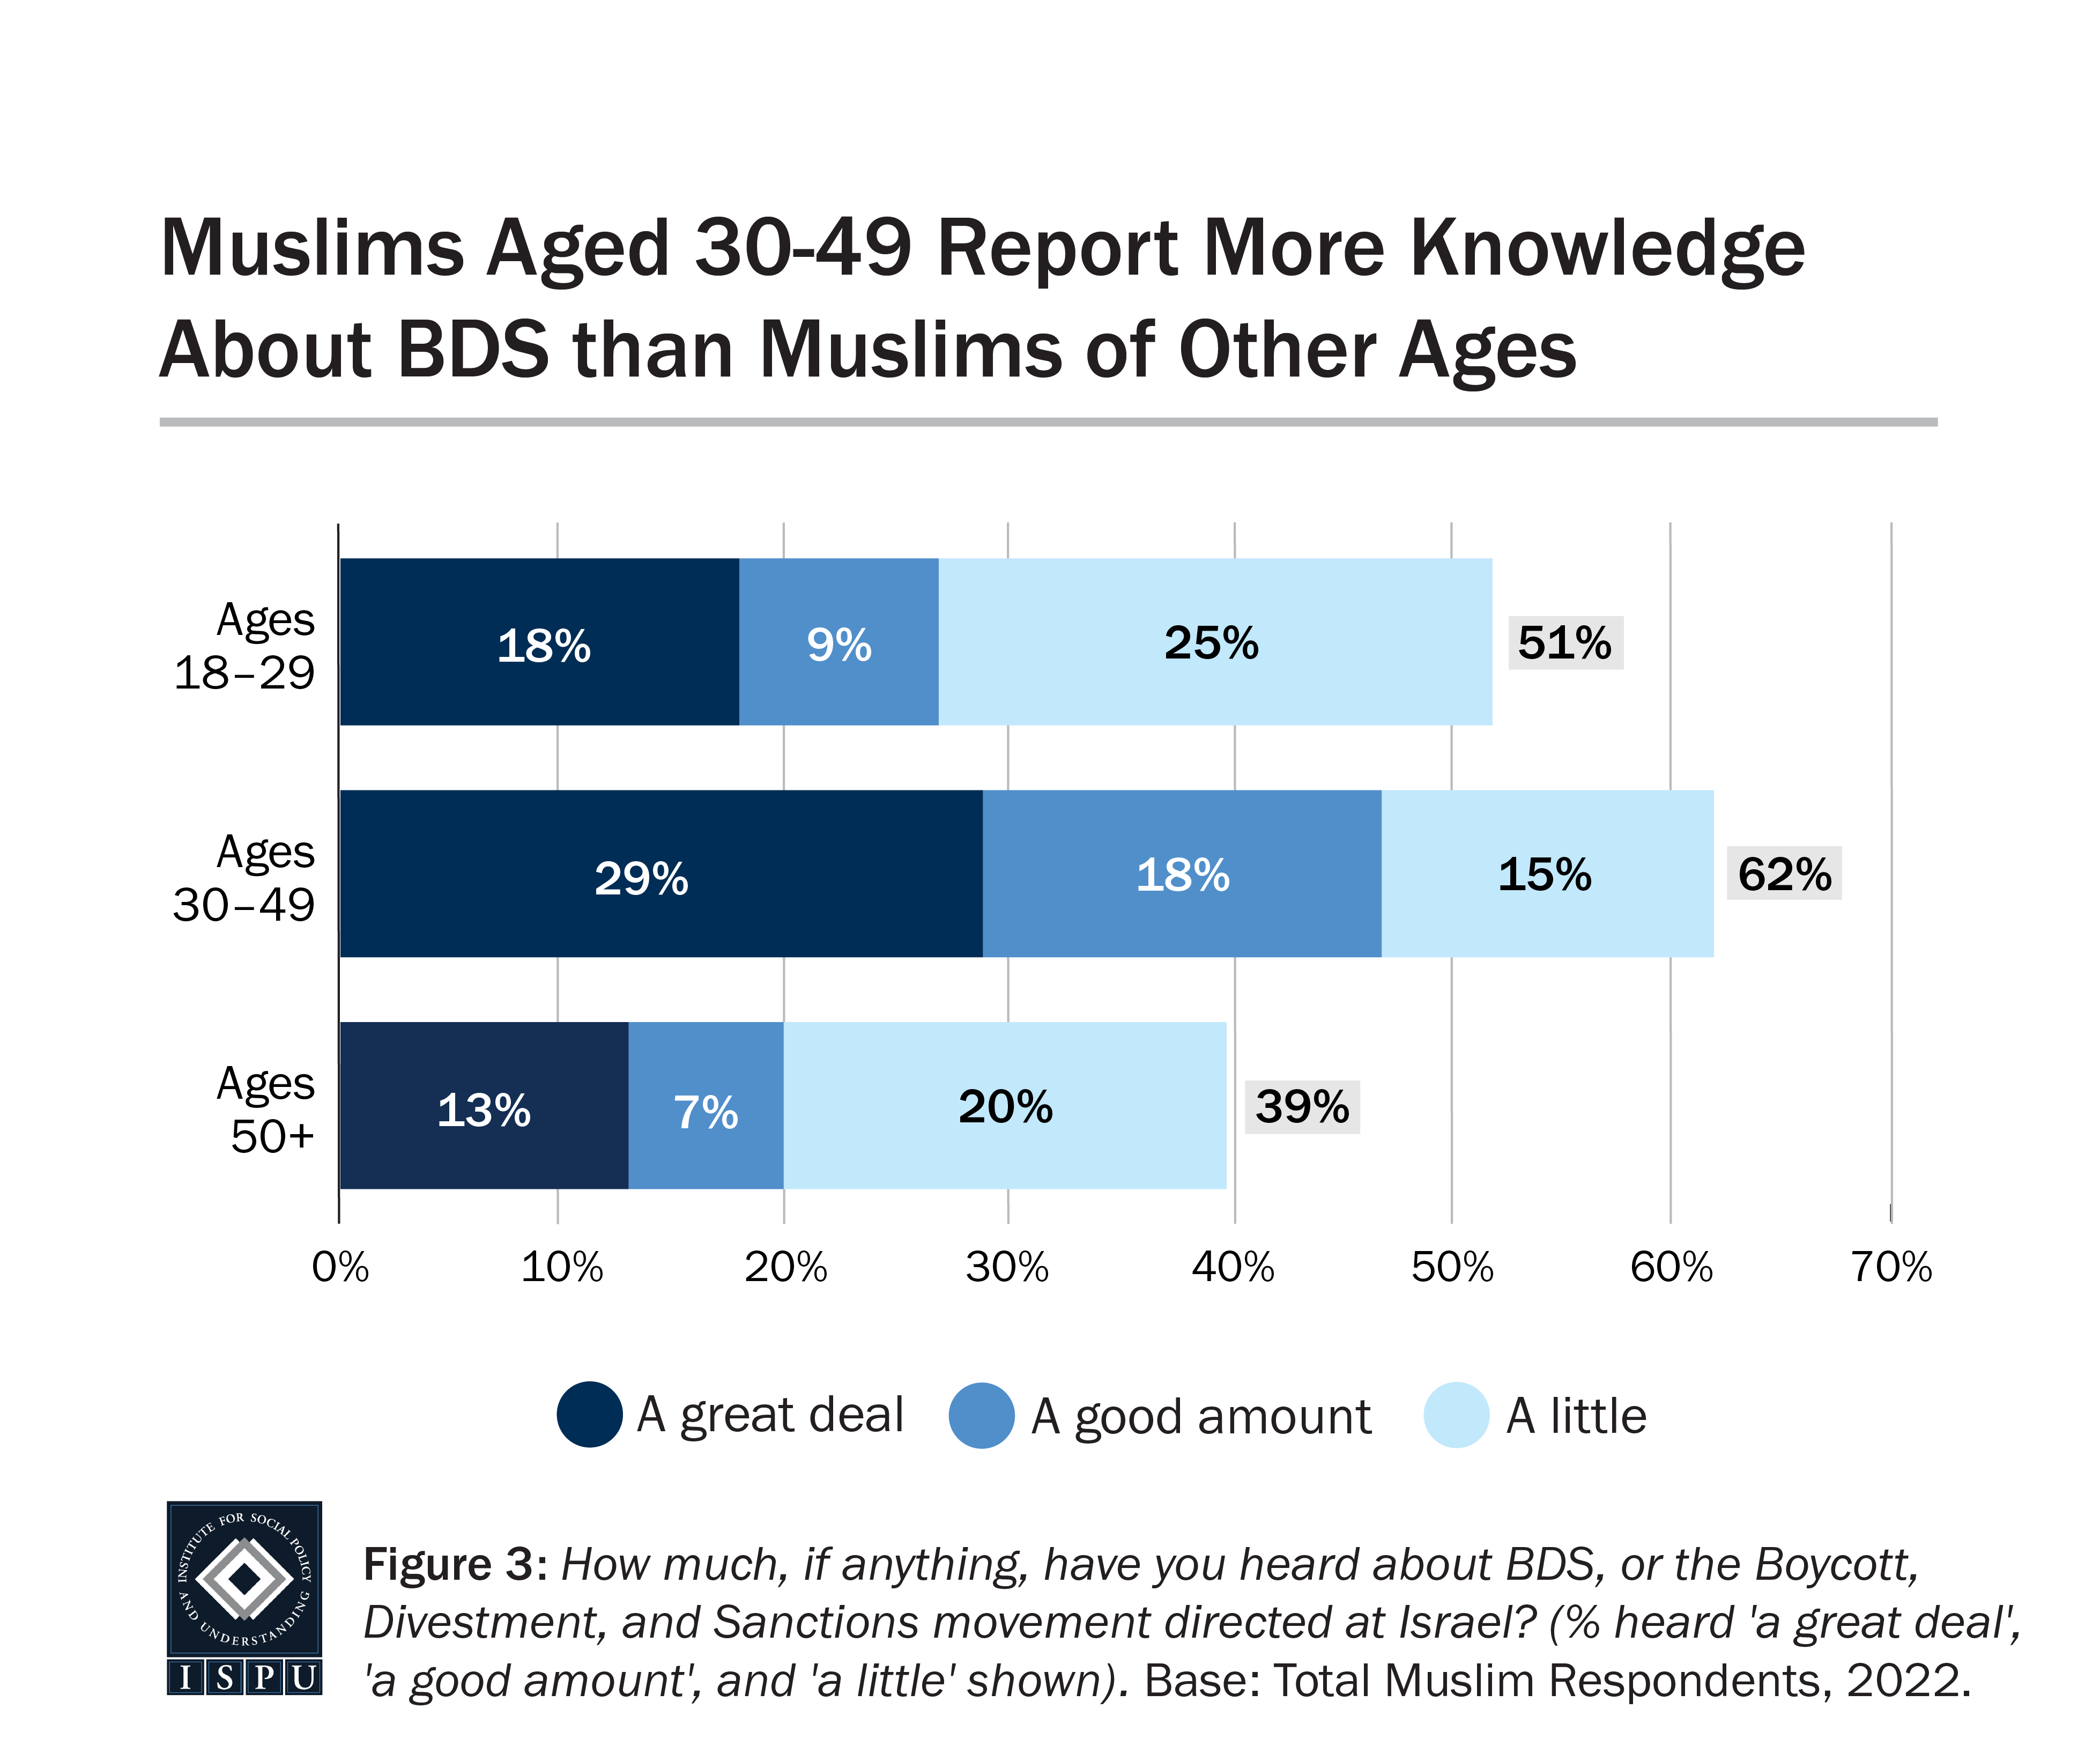 Graph displaying: A bar graph showing that Muslims between the ages of 30 and 49 are more likely than Muslims aged 18-29 and Muslims aged 50 years old or older to have heard about the boycott, divestment, and sanctions movement directed at Israel.